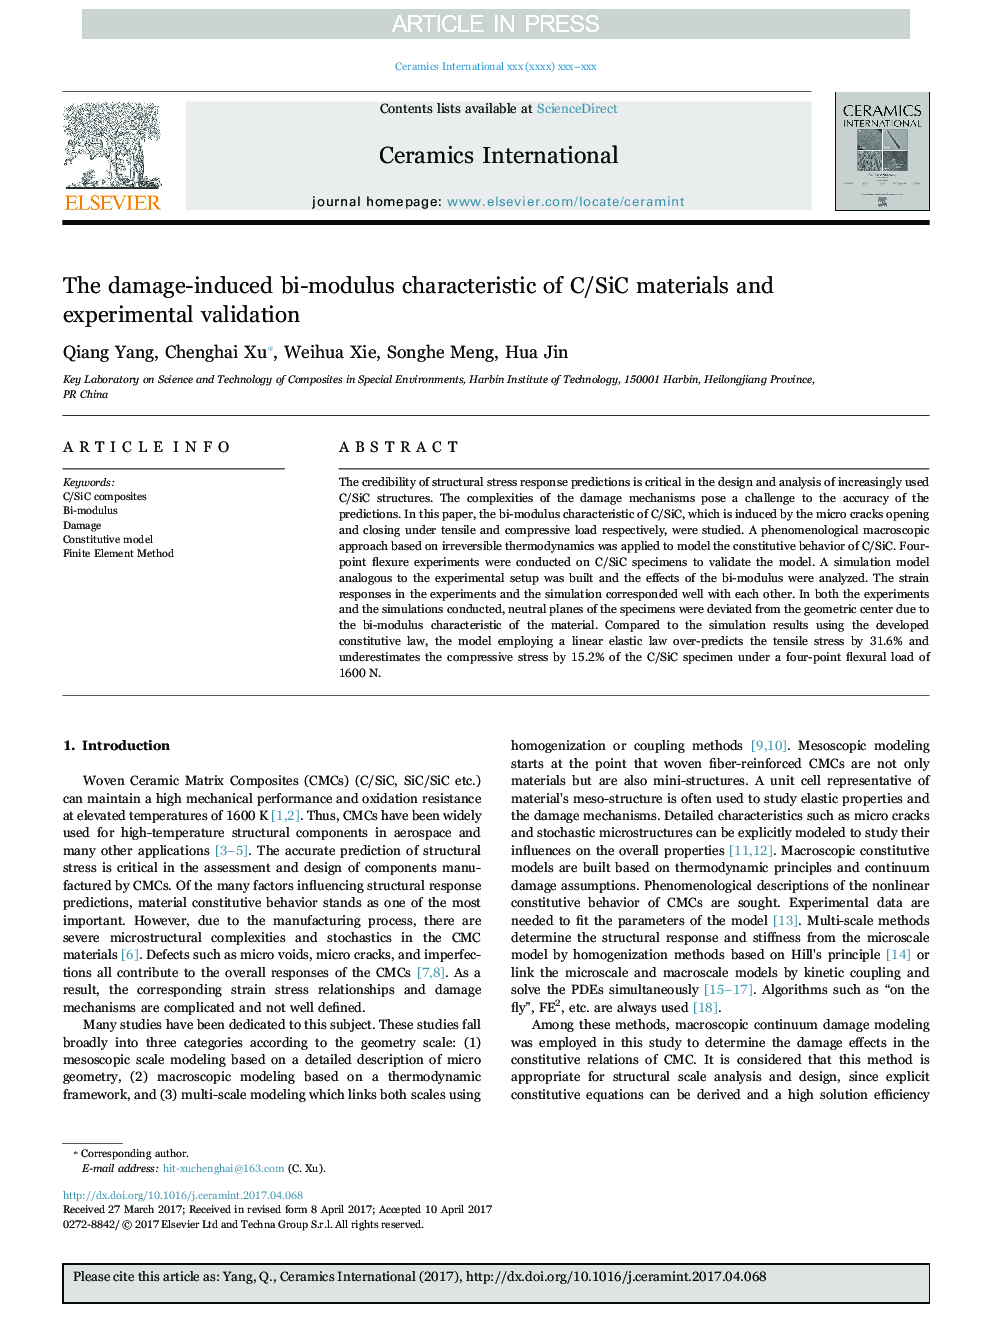 The damage-induced bi-modulus characteristic of C/SiC materials and experimental validation